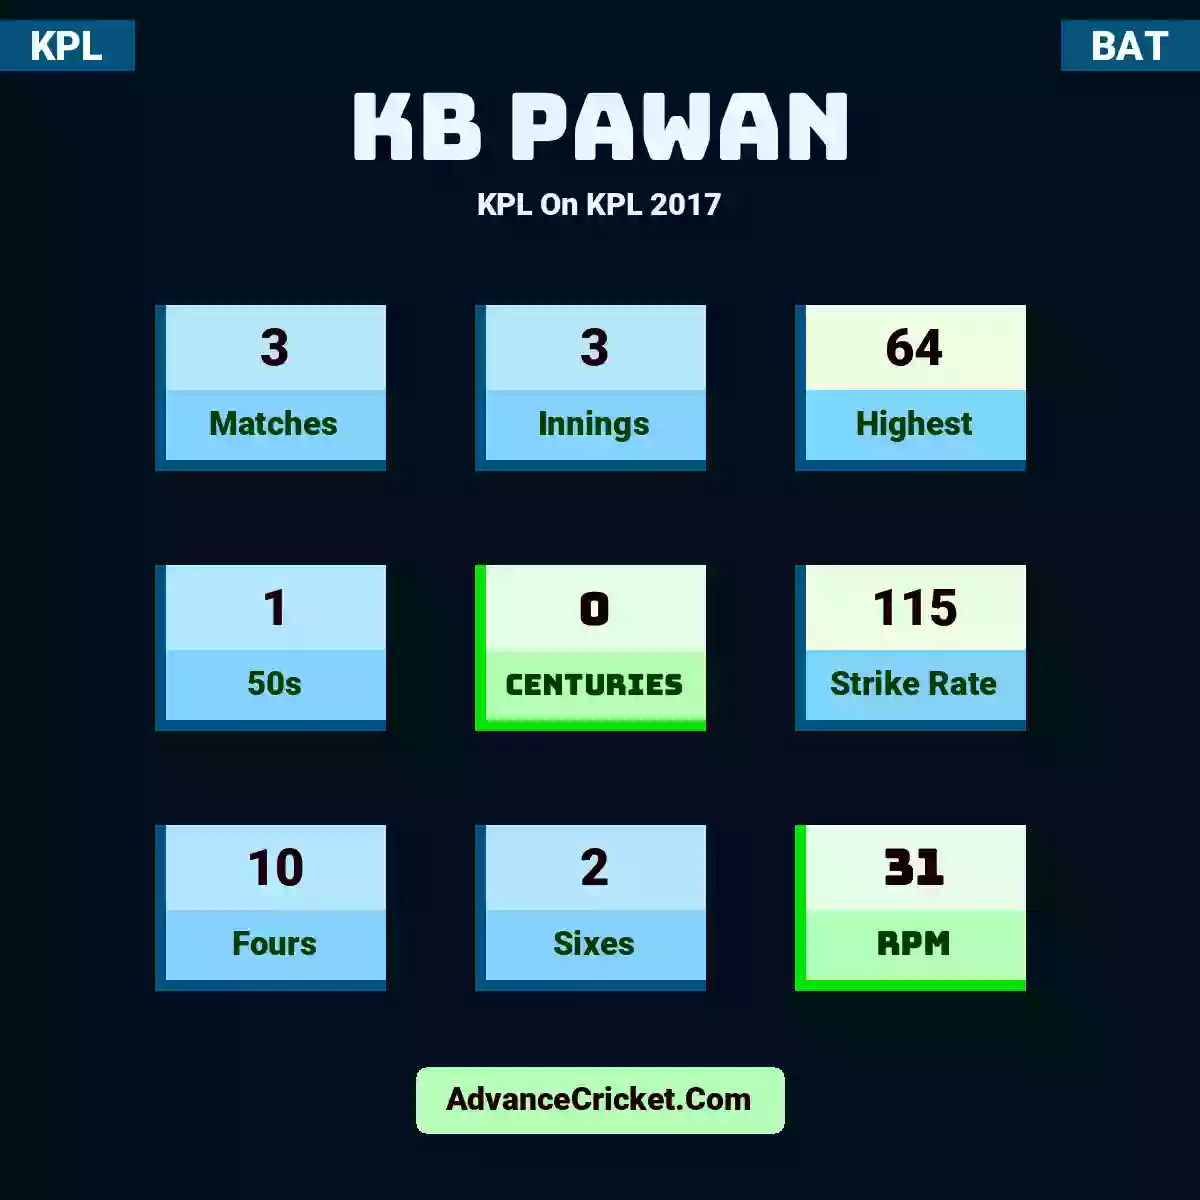 KB Pawan KPL  On KPL 2017, KB Pawan played 3 matches, scored 64 runs as highest, 1 half-centuries, and 0 centuries, with a strike rate of 115. K.Pawan hit 10 fours and 2 sixes, with an RPM of 31.